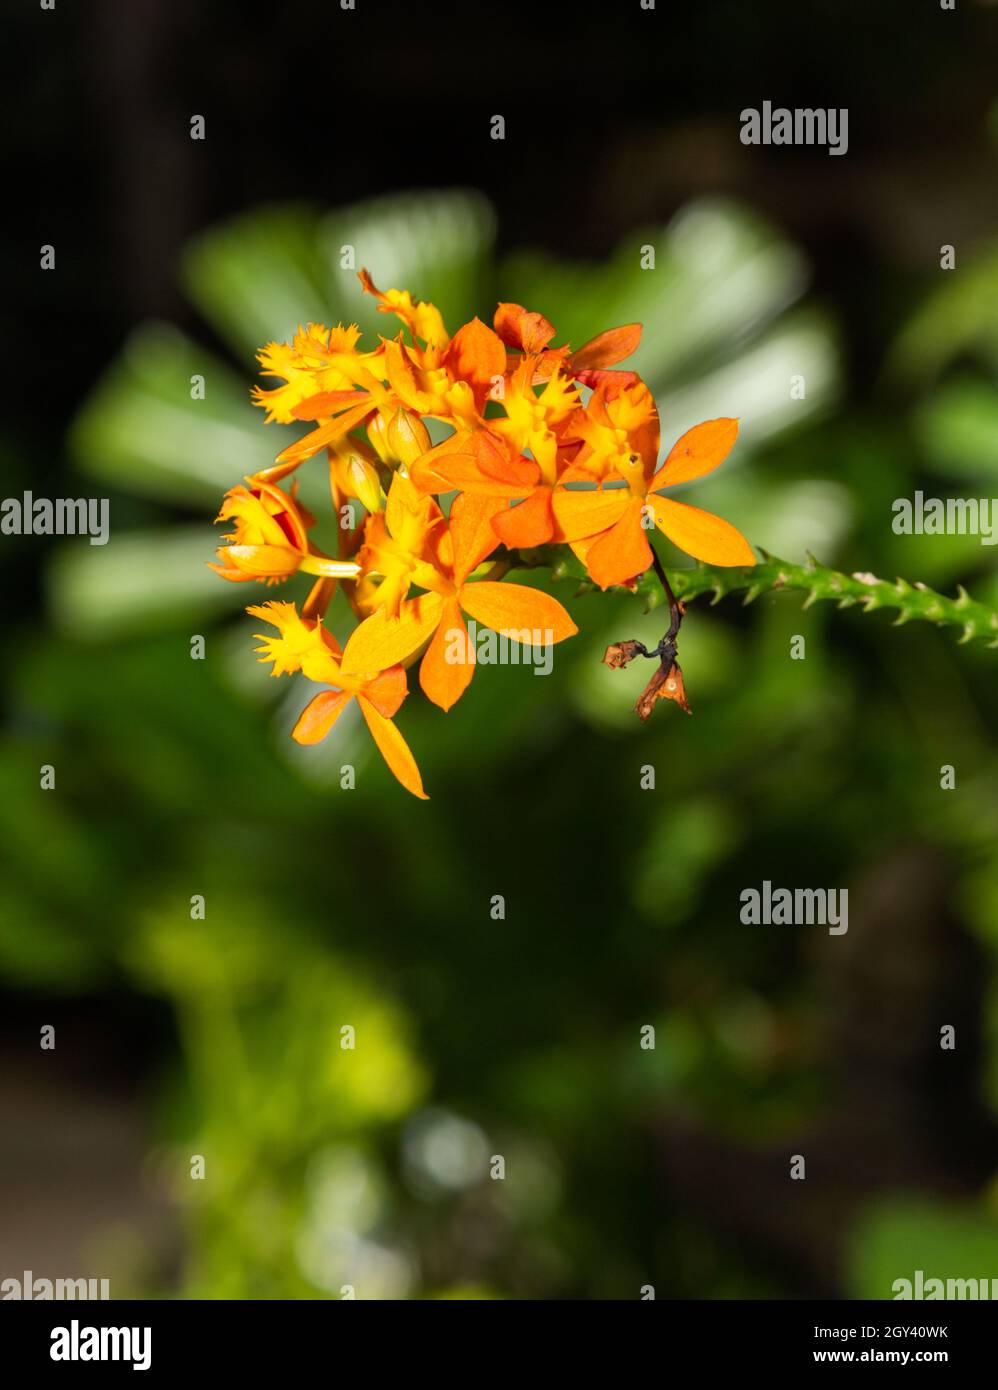 EPIDENDRUM IBAGUENSE (CRUCIFIX ORCHID) - ORANGE easy orchid for beginners Stock Photo